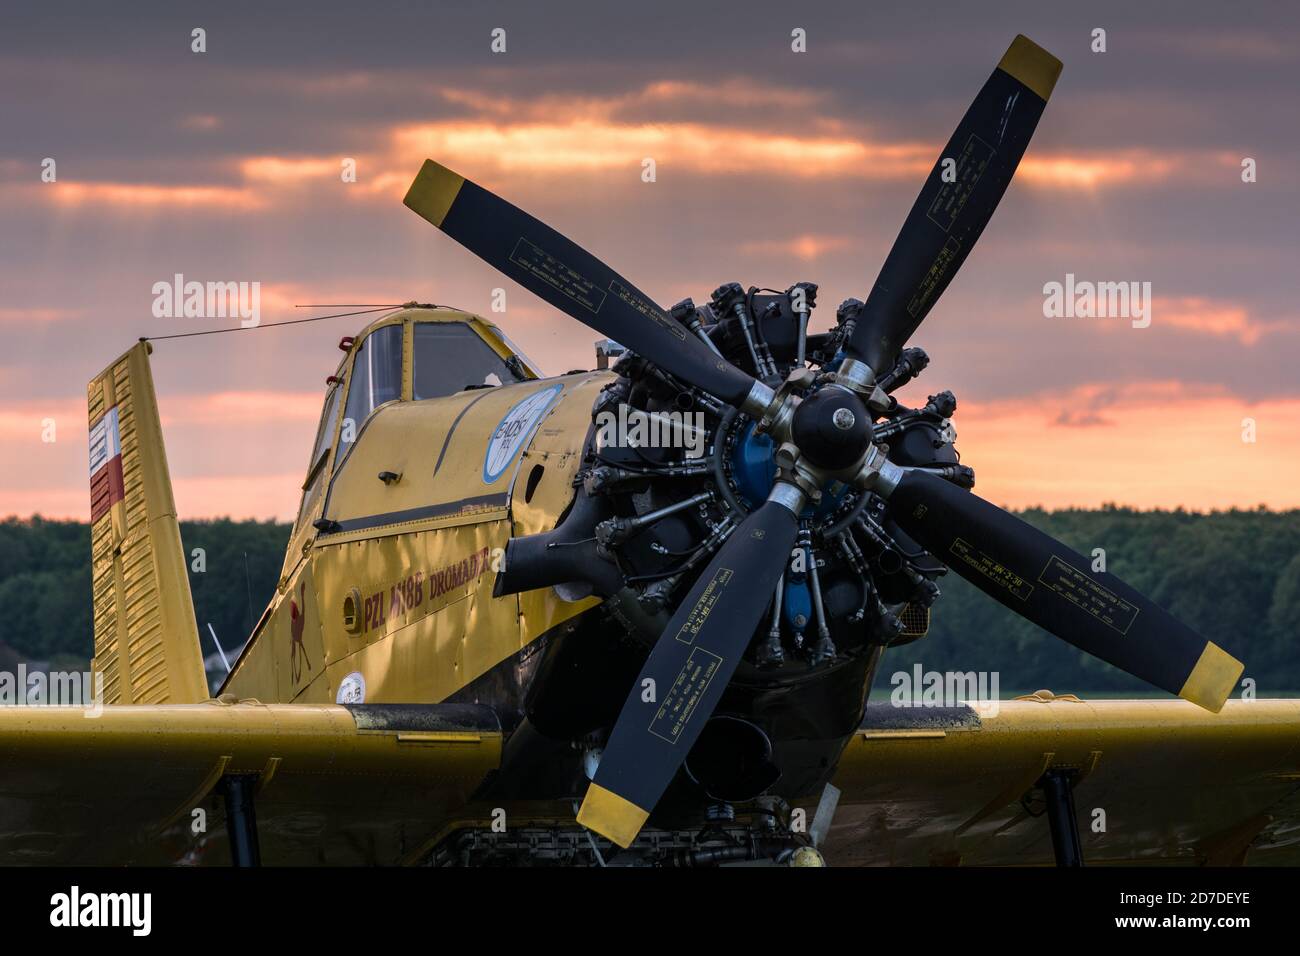 Polish classic airplane PZL M18 Dromader agricultural version on Radawiec airfield at dusk Stock Photo